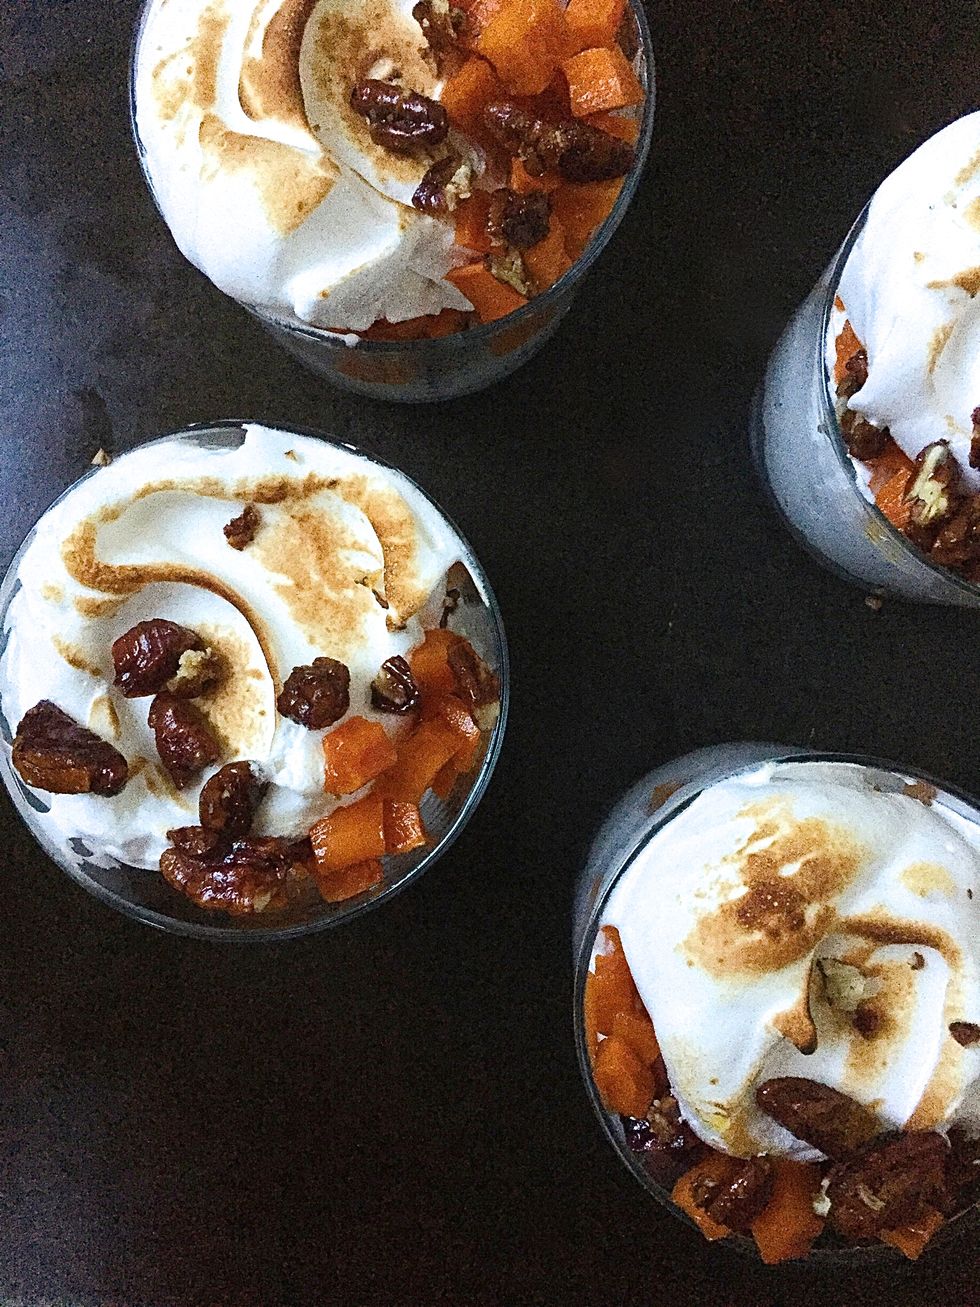 candy potato meringue trifle with candied pecans  Sweet Potato Meringue Trifle with Candied Pecans 1446578527 delish sweet potato meringue trifle with candied pecans